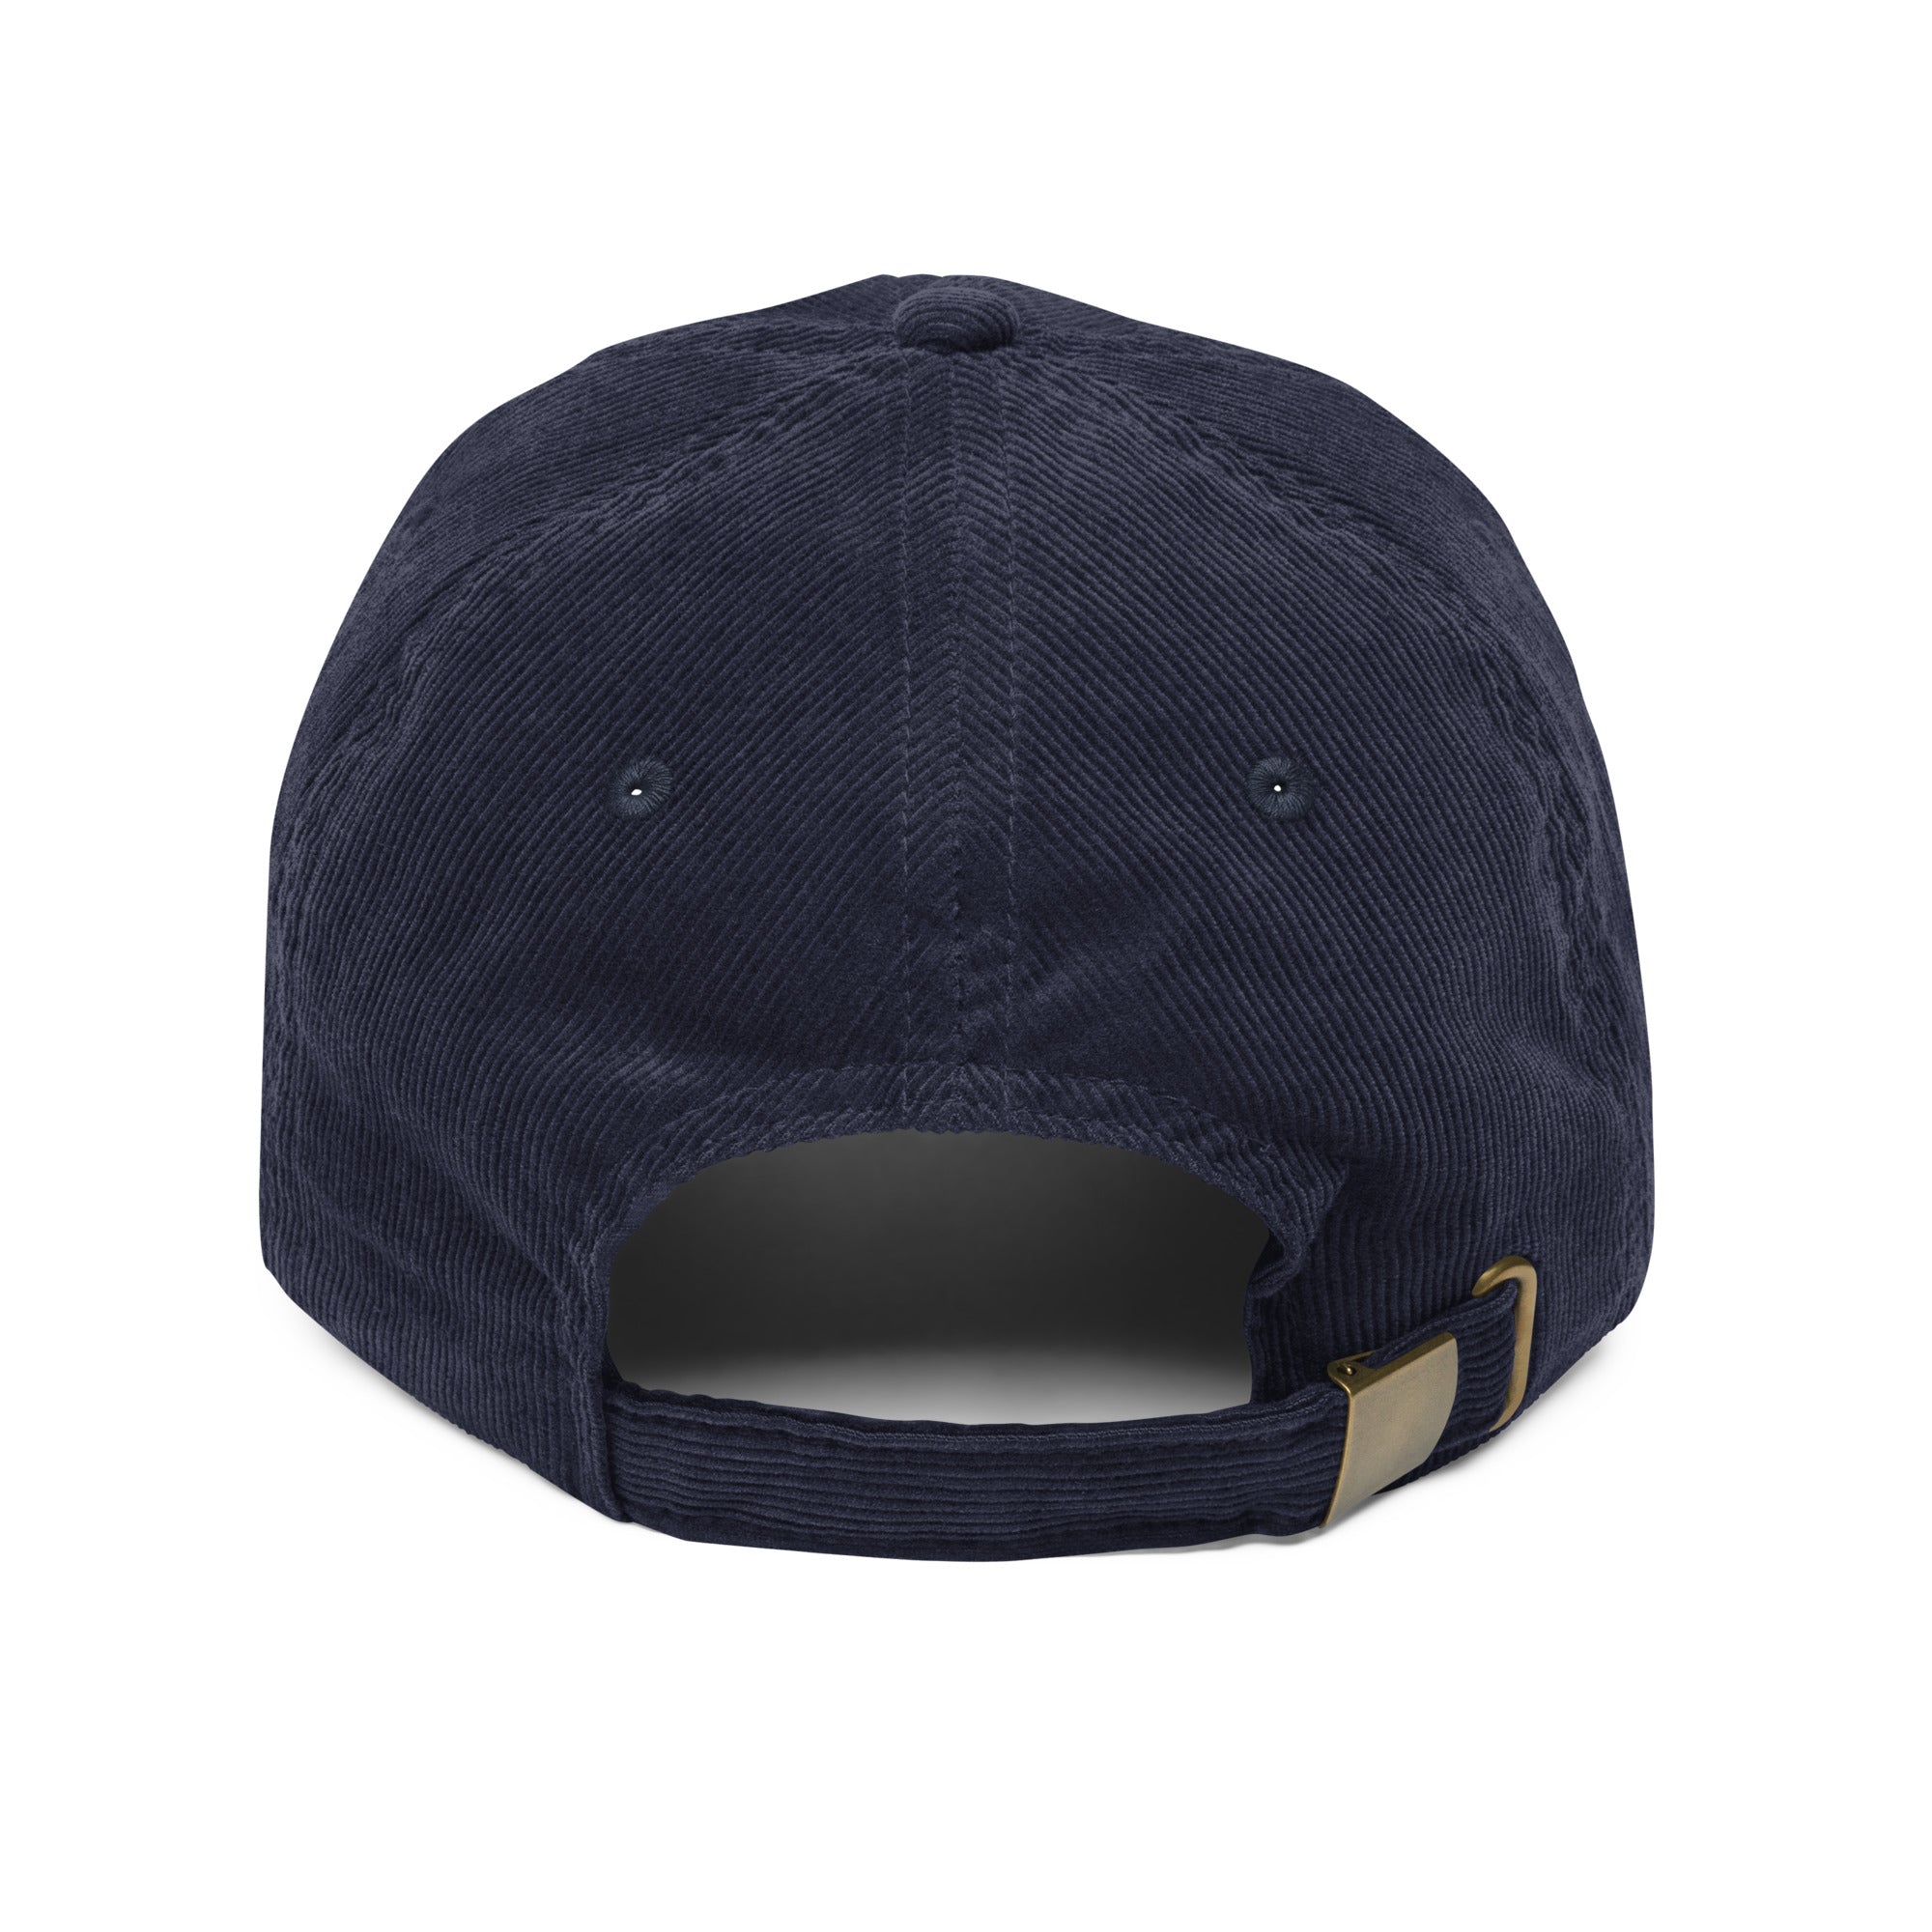 Independent Grizzly Bear Vintage Corduroy Cap